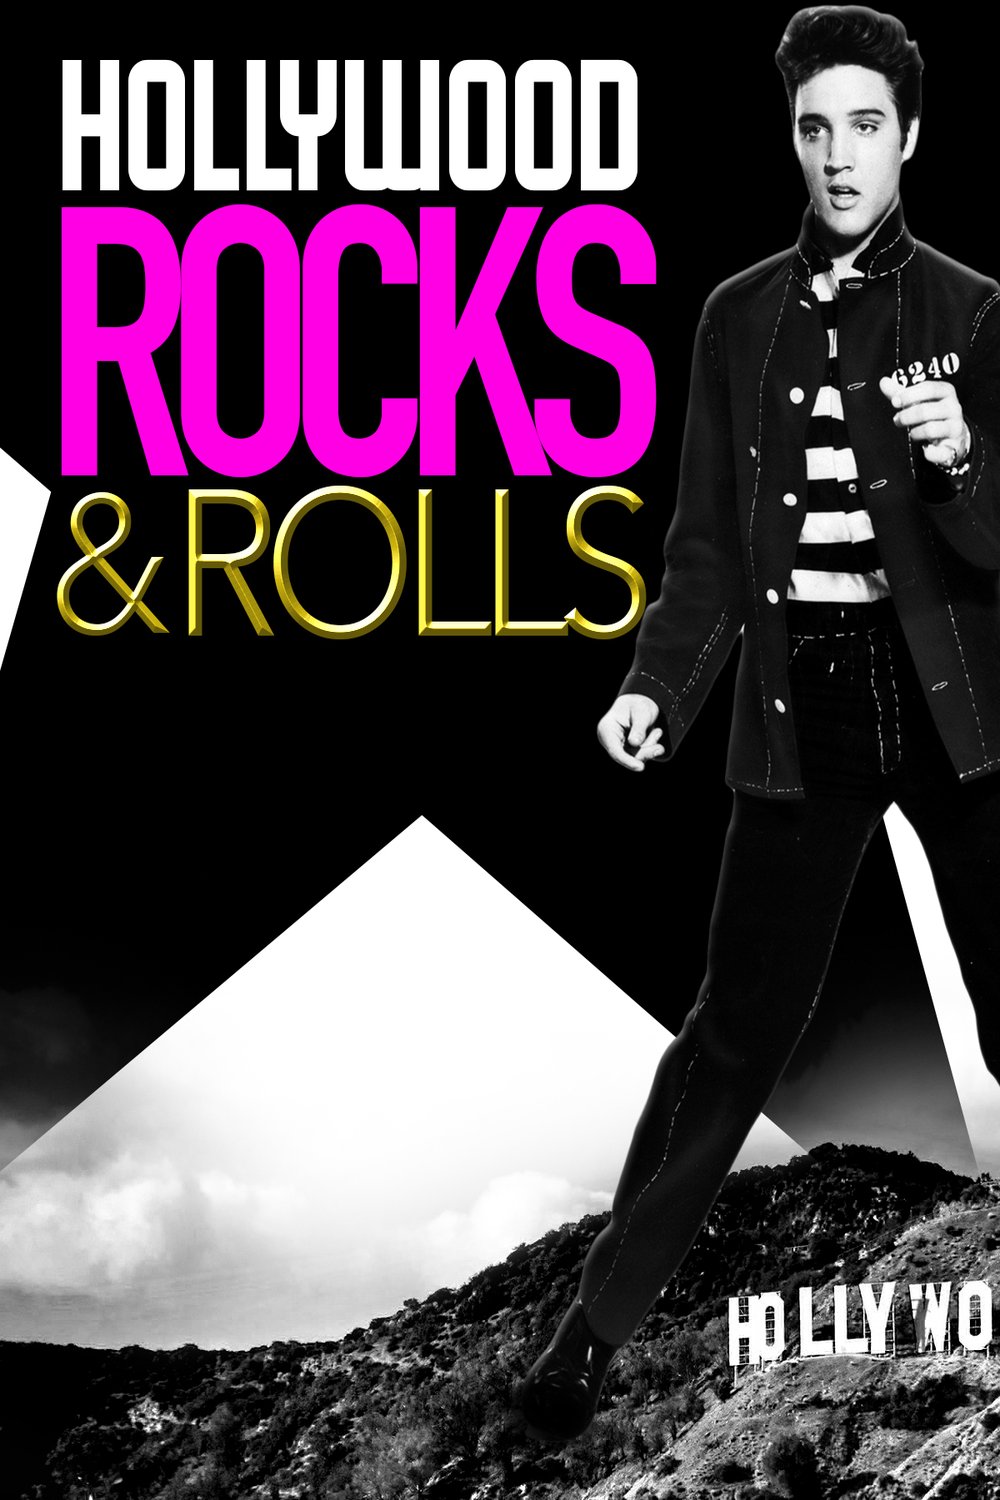 Poster of the movie Hollywood Rocks 'n' Rolls in the '50s